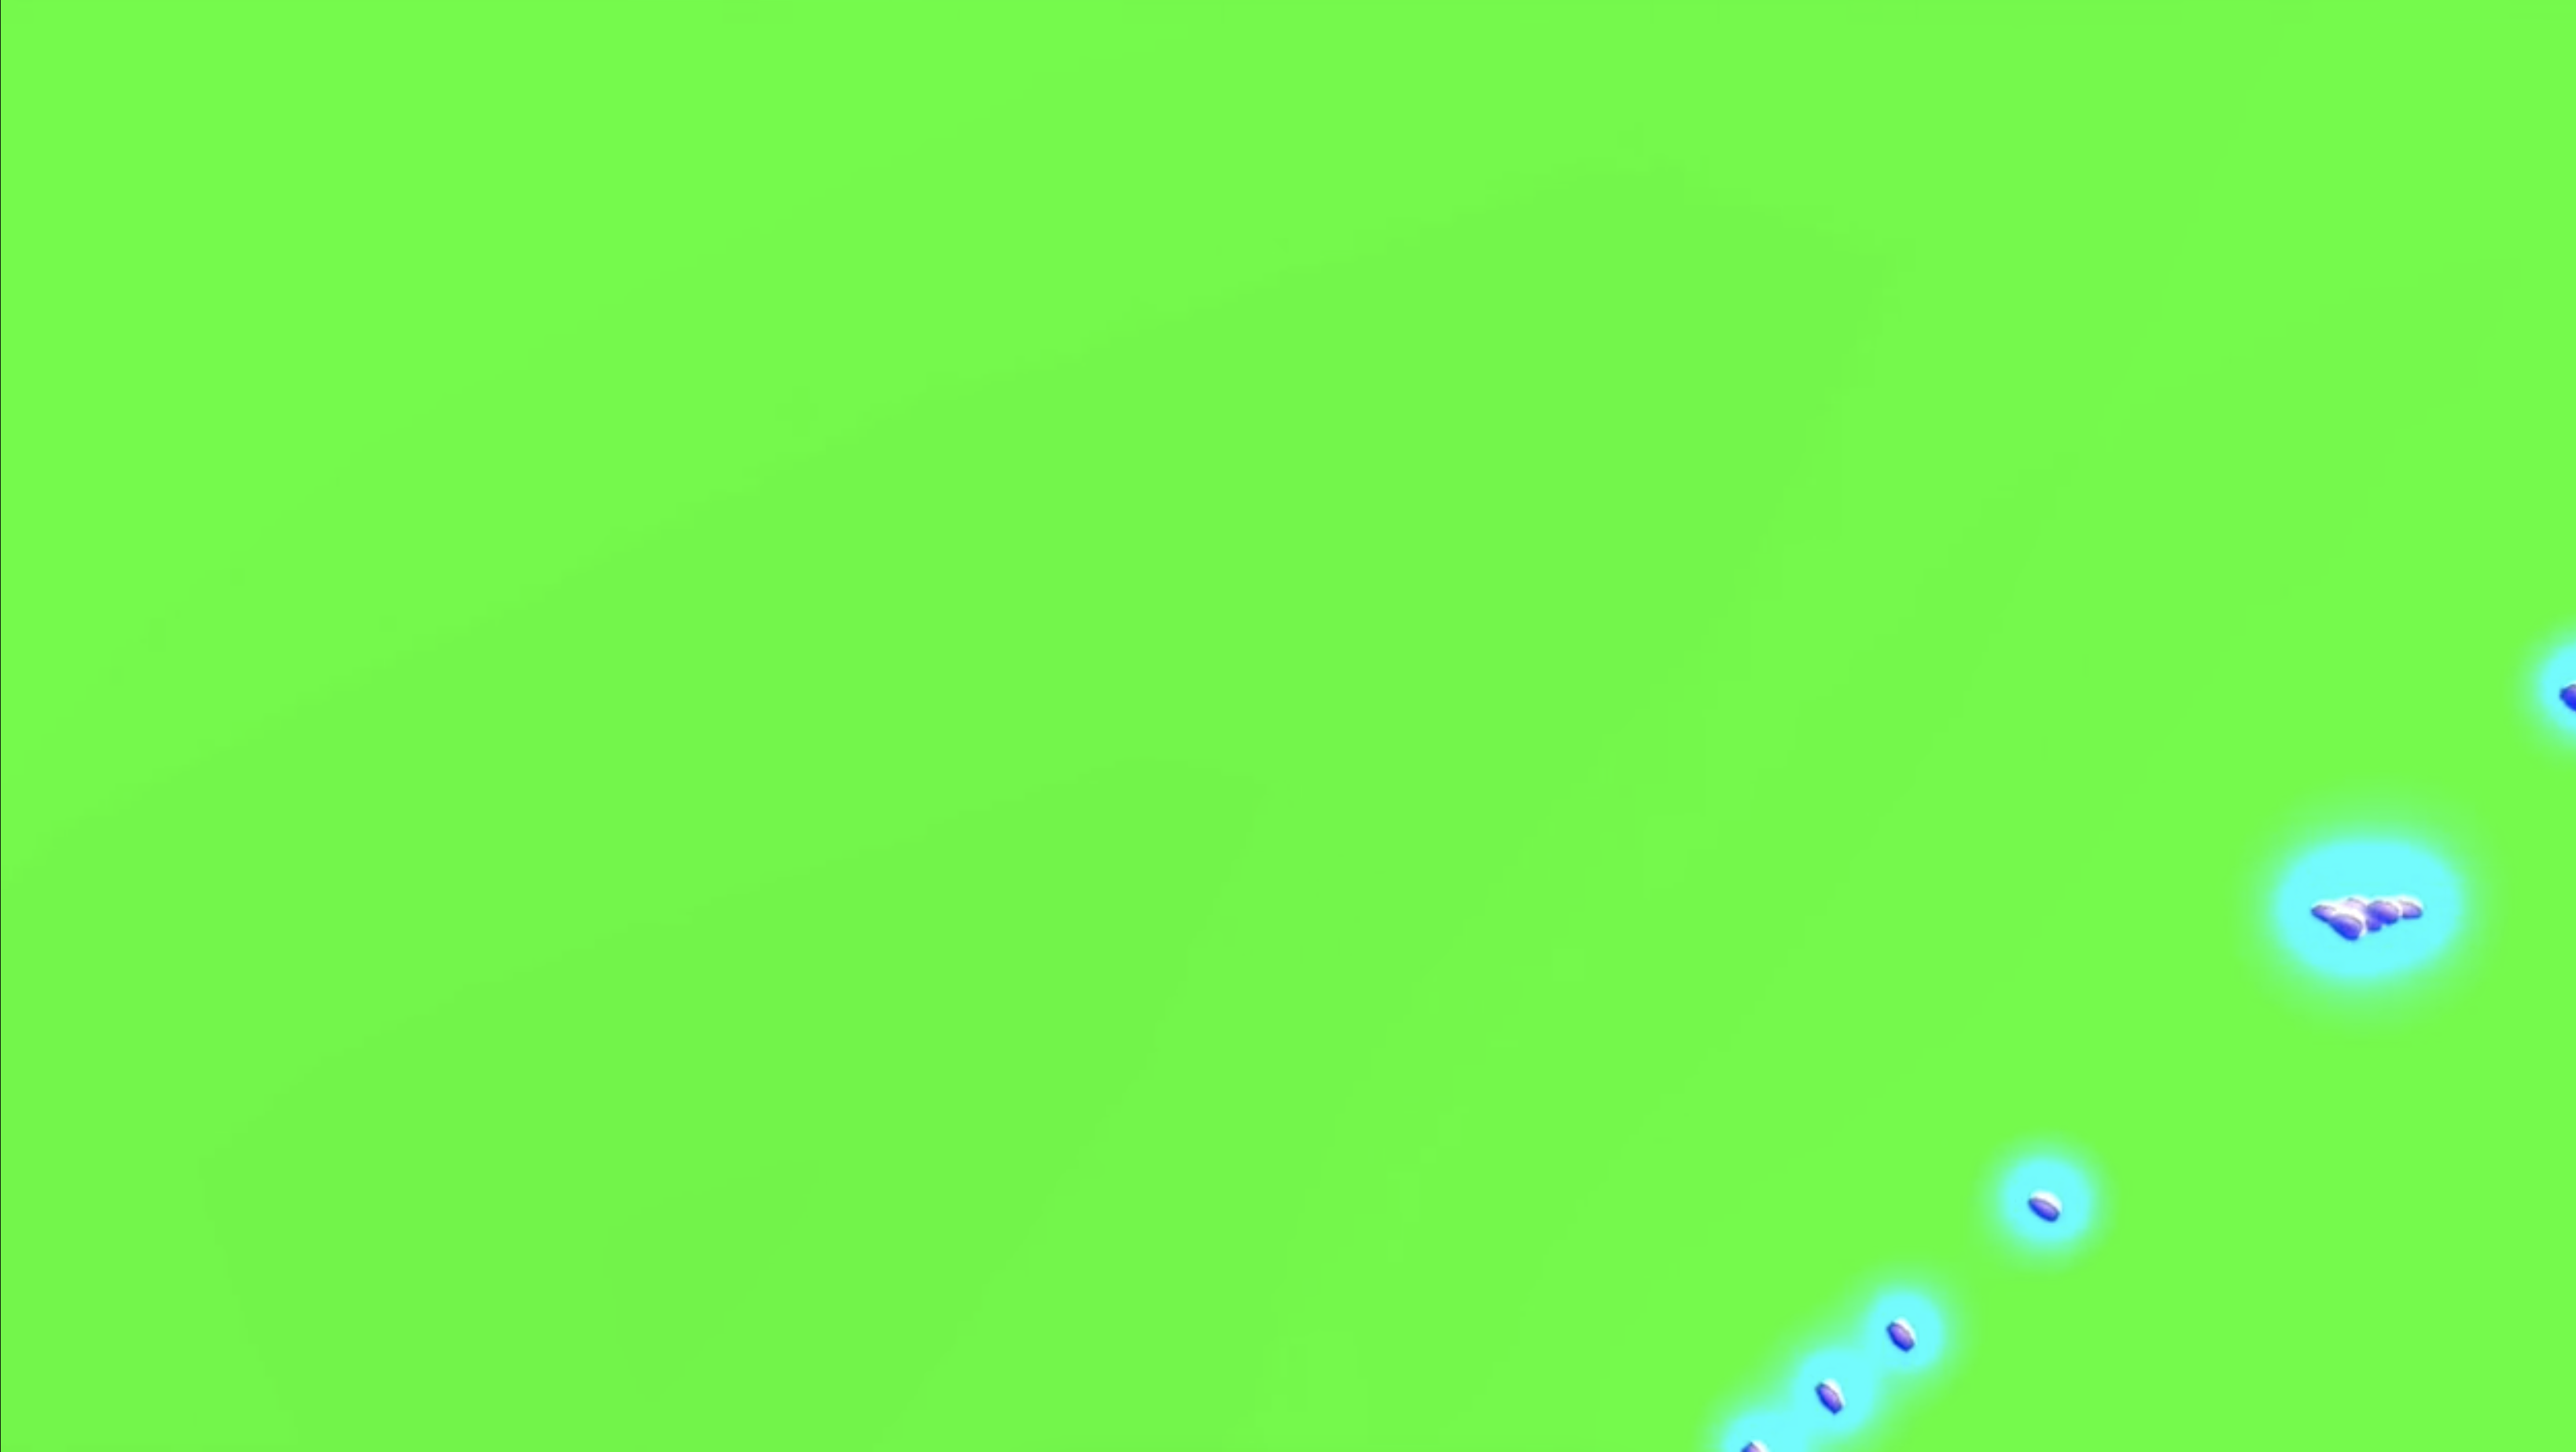 A rectangular video still from the film “Try to Forget” by artist Caroline Coolidge which is entirely a bright, artificial green that has six, small, gray, circular objects, surrounded in a green glow, making a diagonal line in the bottom right side of the frame.